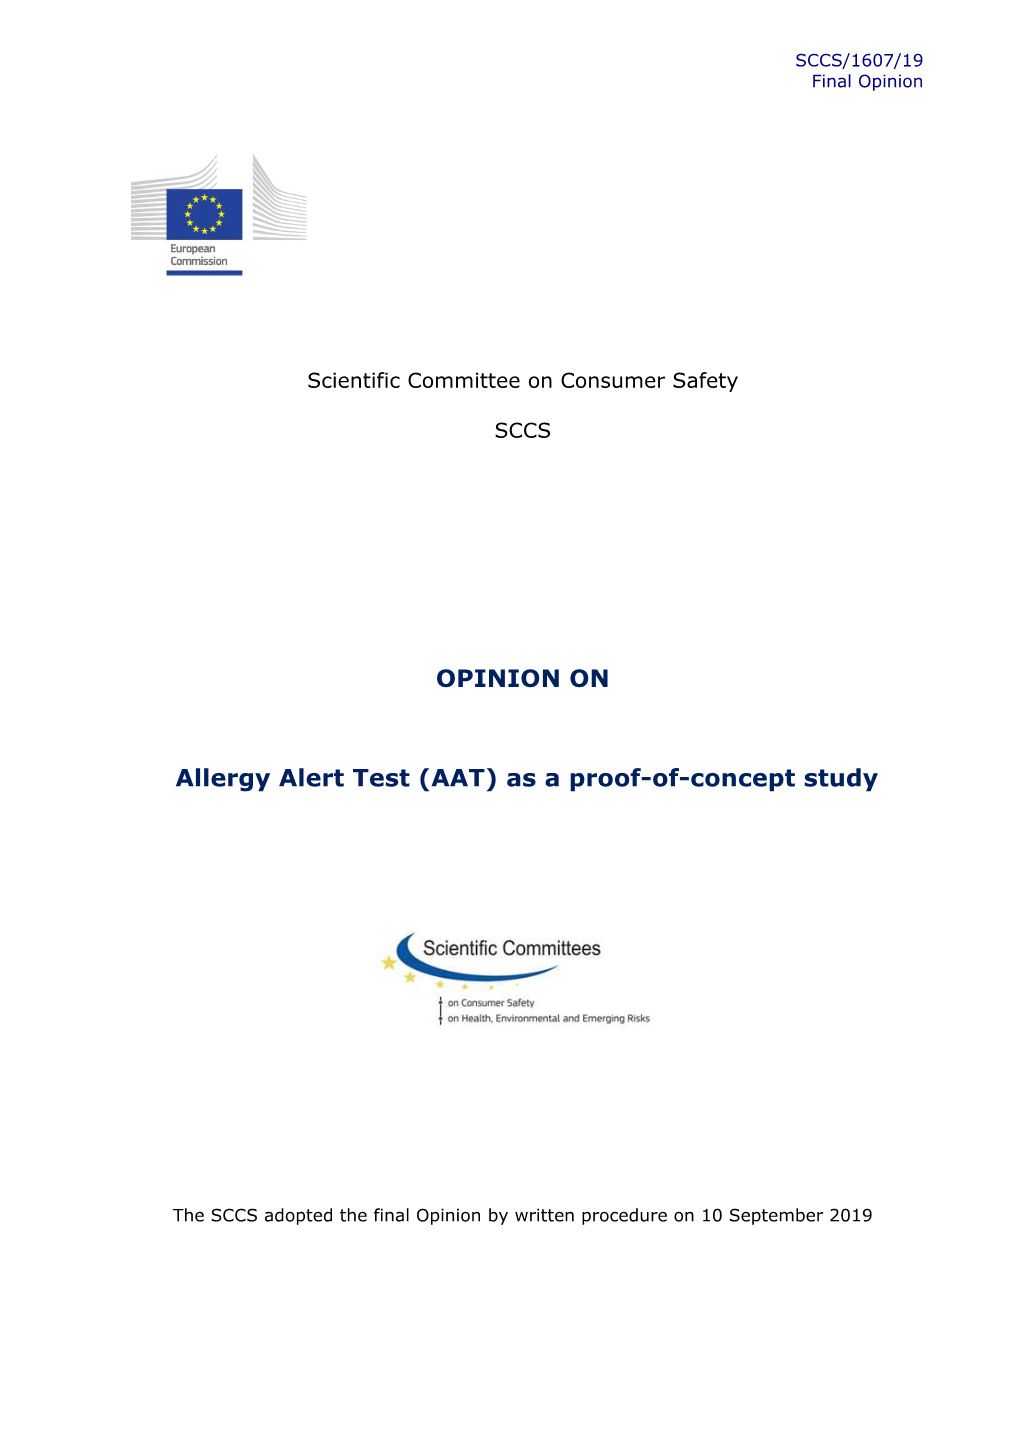 Opinion on Allergy Alert Test (AAT) As a Proof-Of-Concept Study ______